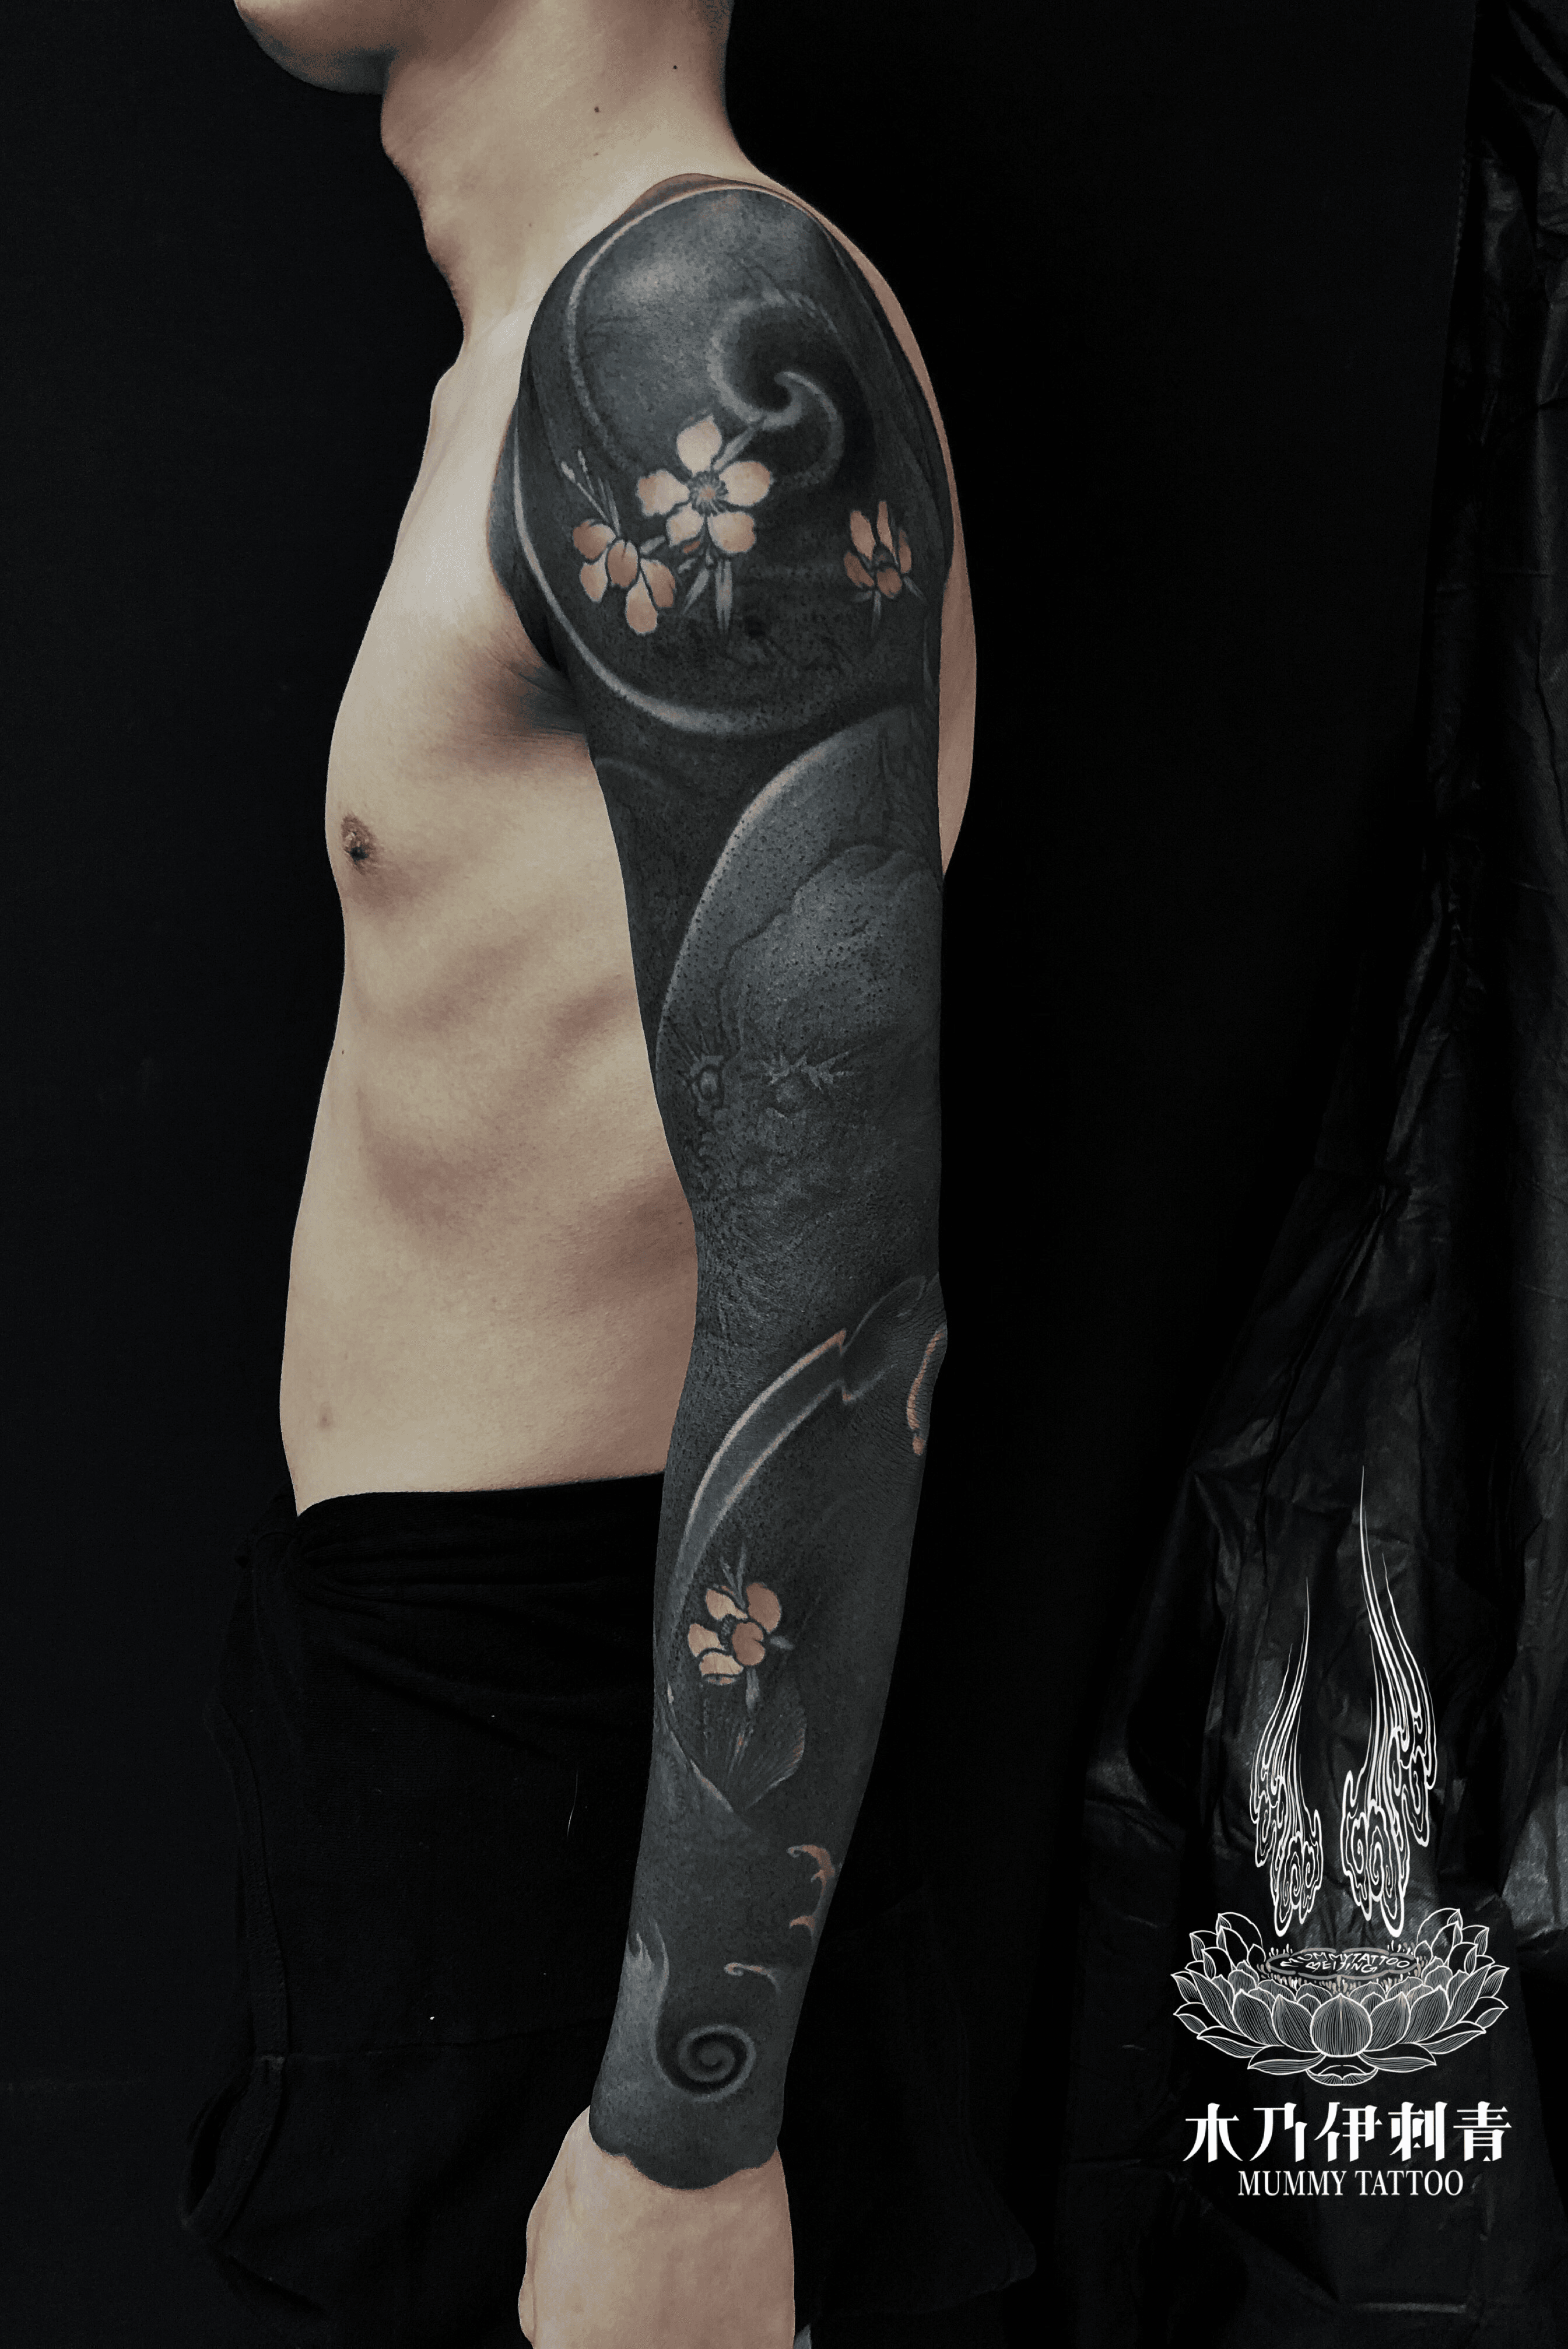 Some Awesome Black Tattoo Cover up Ideas  Tech PreviewTechScience